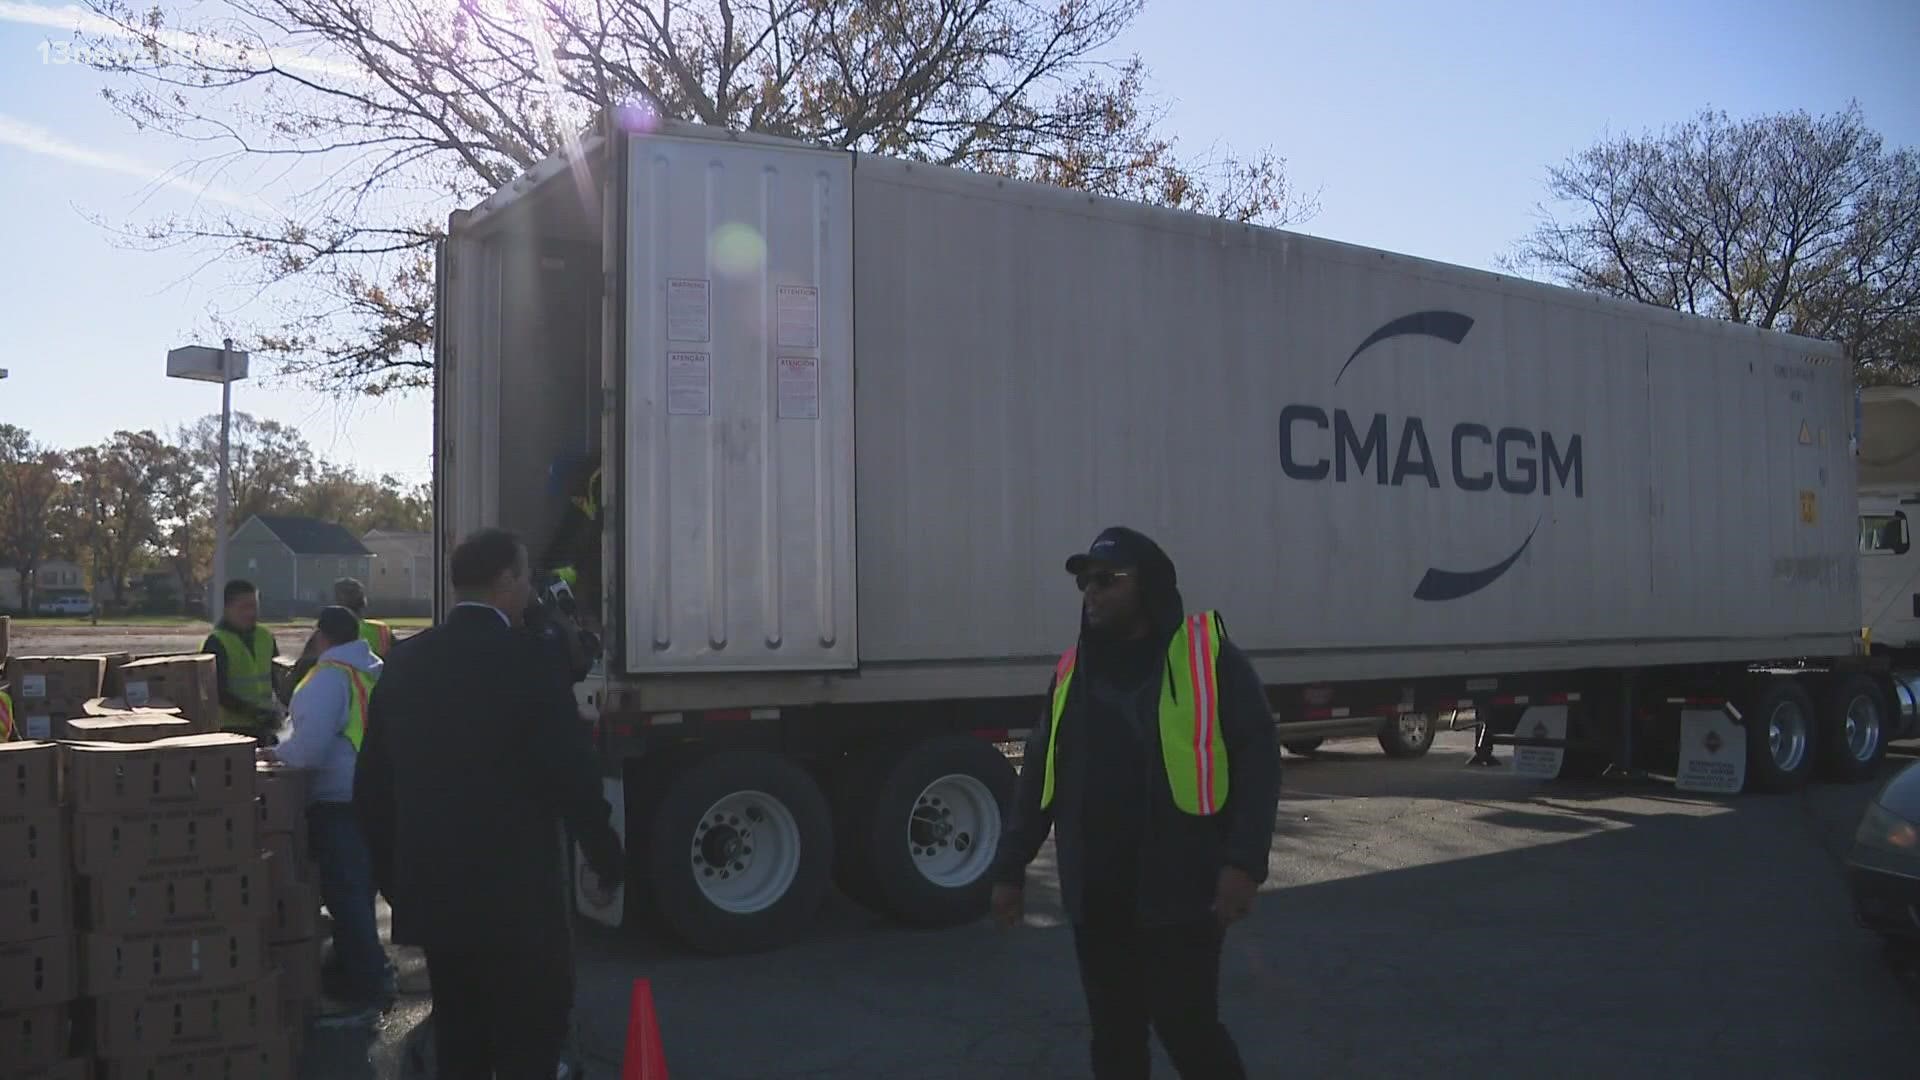 The Thanksgiving donation drive was coordinated by the Salvation Army of Hampton Roads and shipping company CMA CGM.